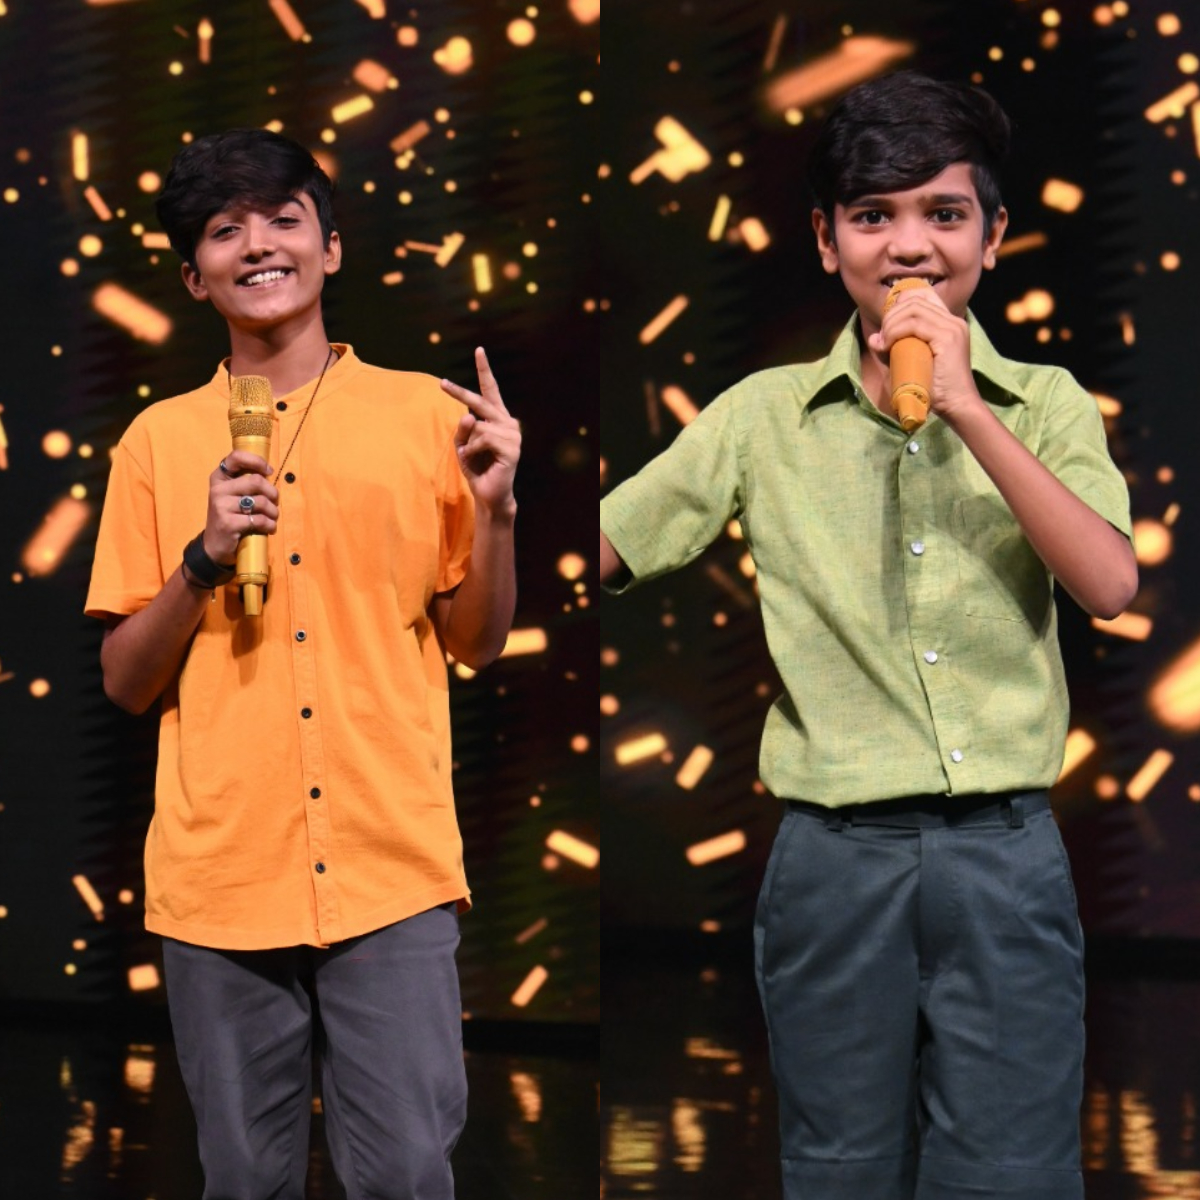 Superstar Singer 2: Mohammad Faiz, Mani, Pranjal Biswas and three more selected as Top 6 finalists